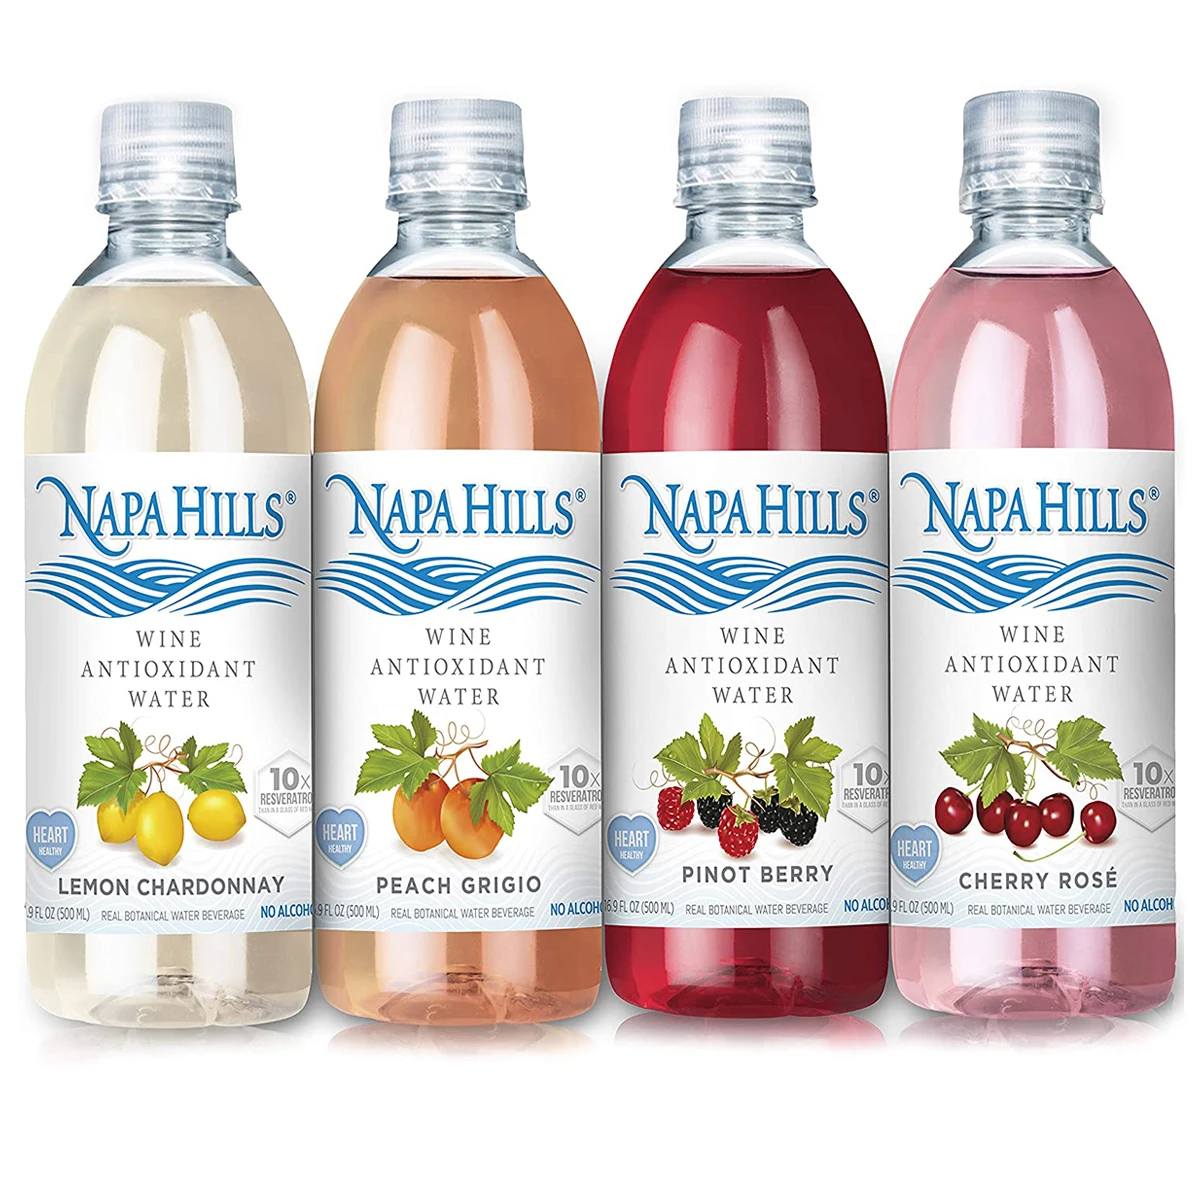 
Best Non Alcoholic Napa Hills Wine Variety Flavored Antioxidant Resveratrenriched Drink 3 Lemon 3 Berry 3 Peach 3 Cherry 12 Pack  (1700002845768)